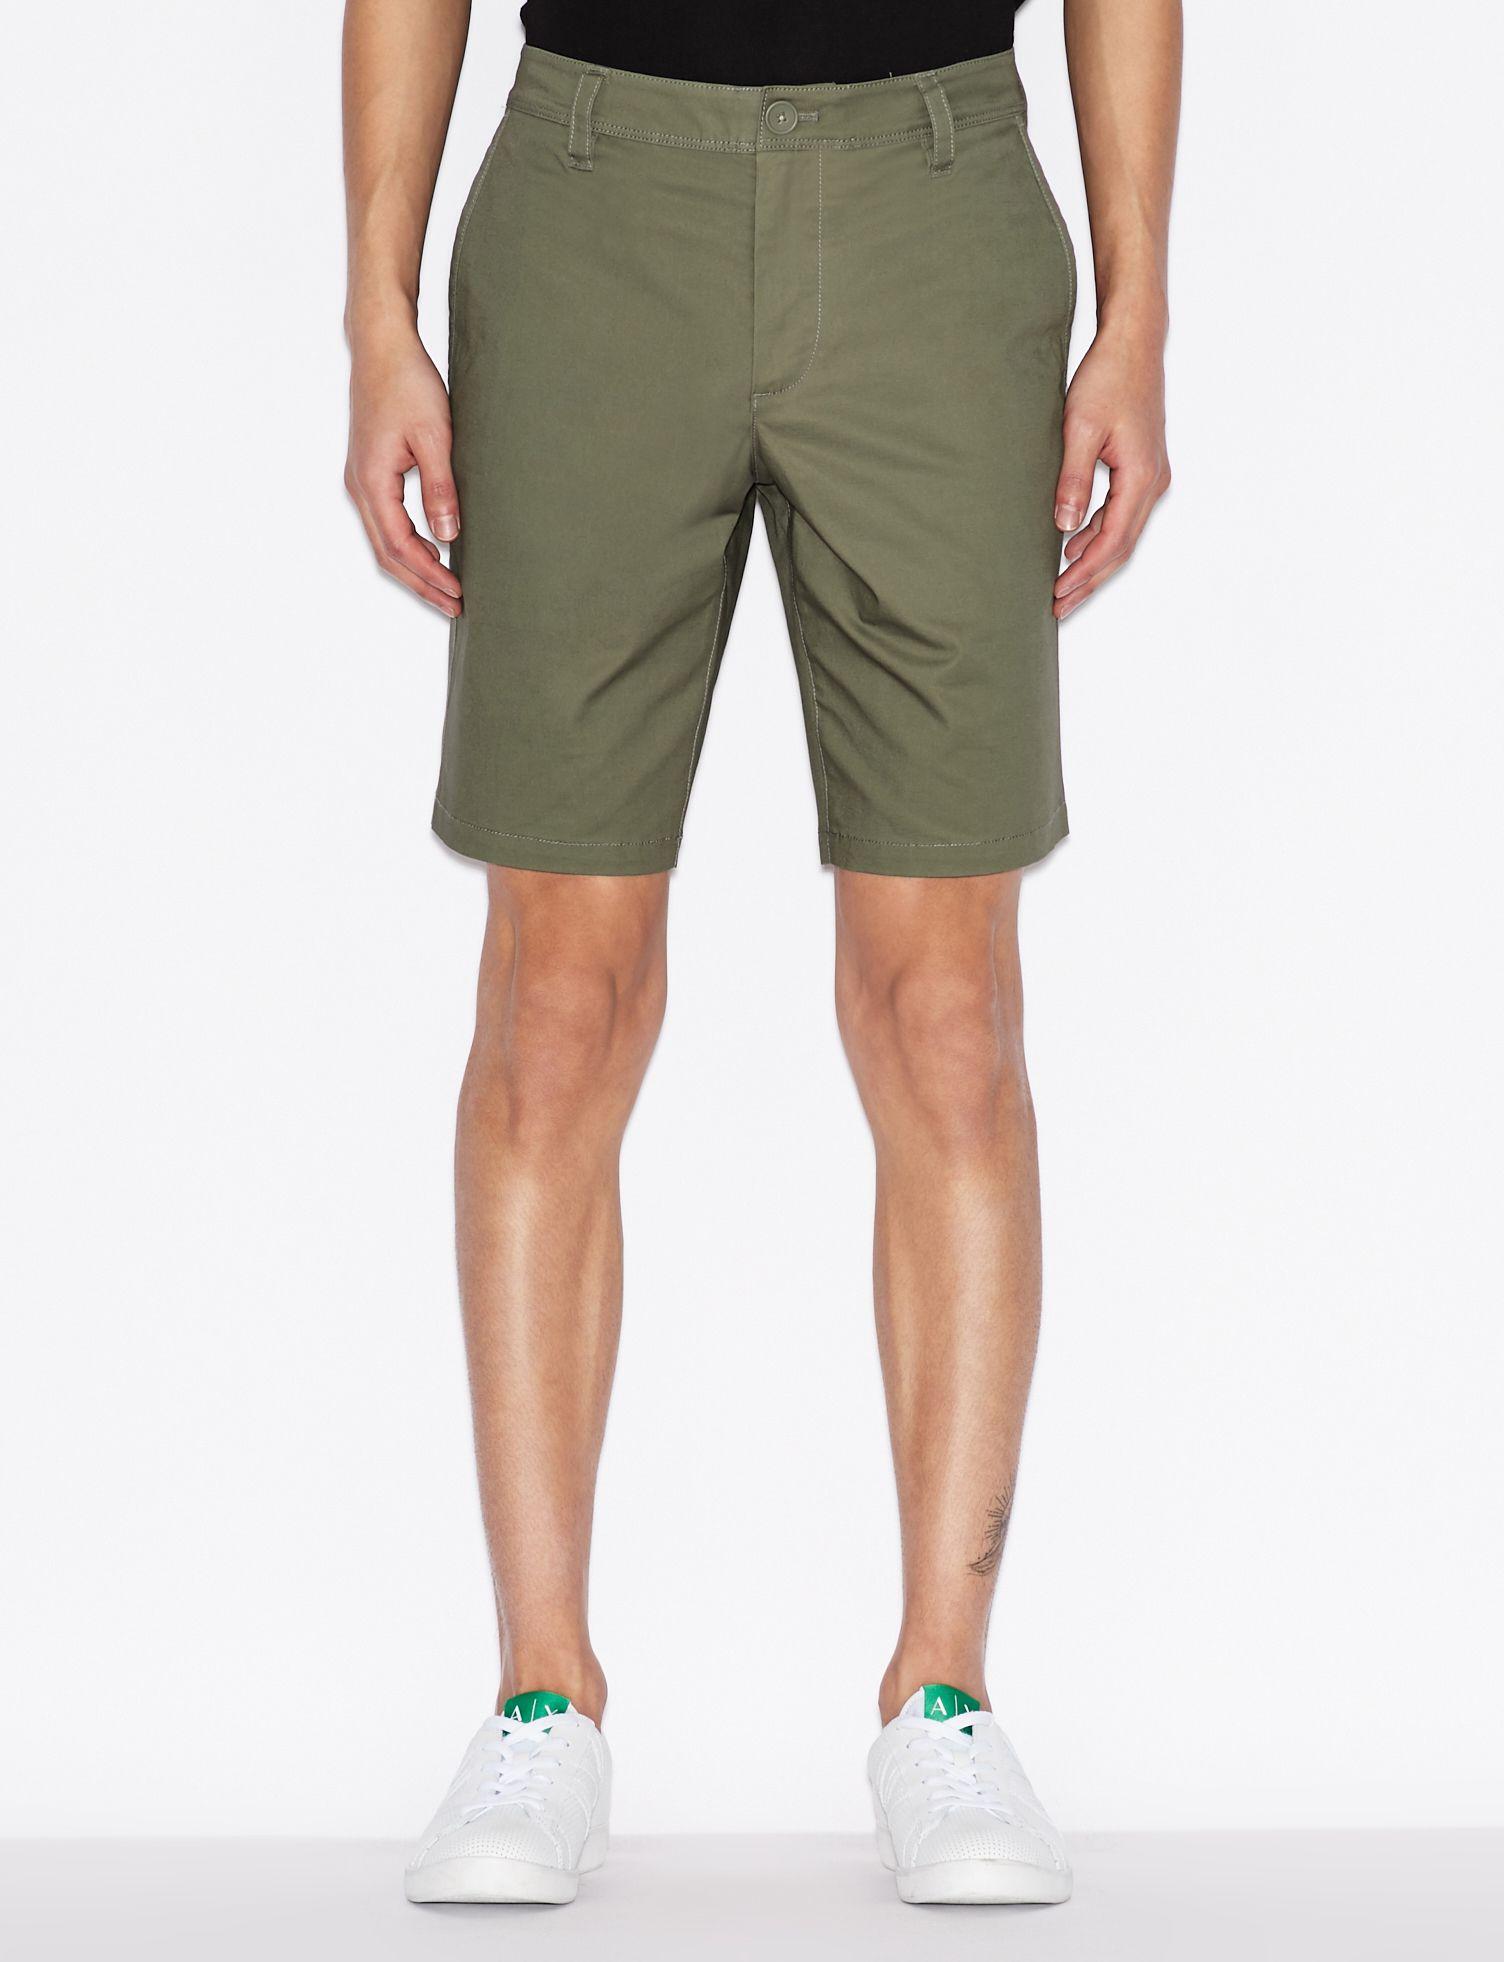 Armani Exchange Stretch-cotton Chino Shorts in Green for Men - Lyst